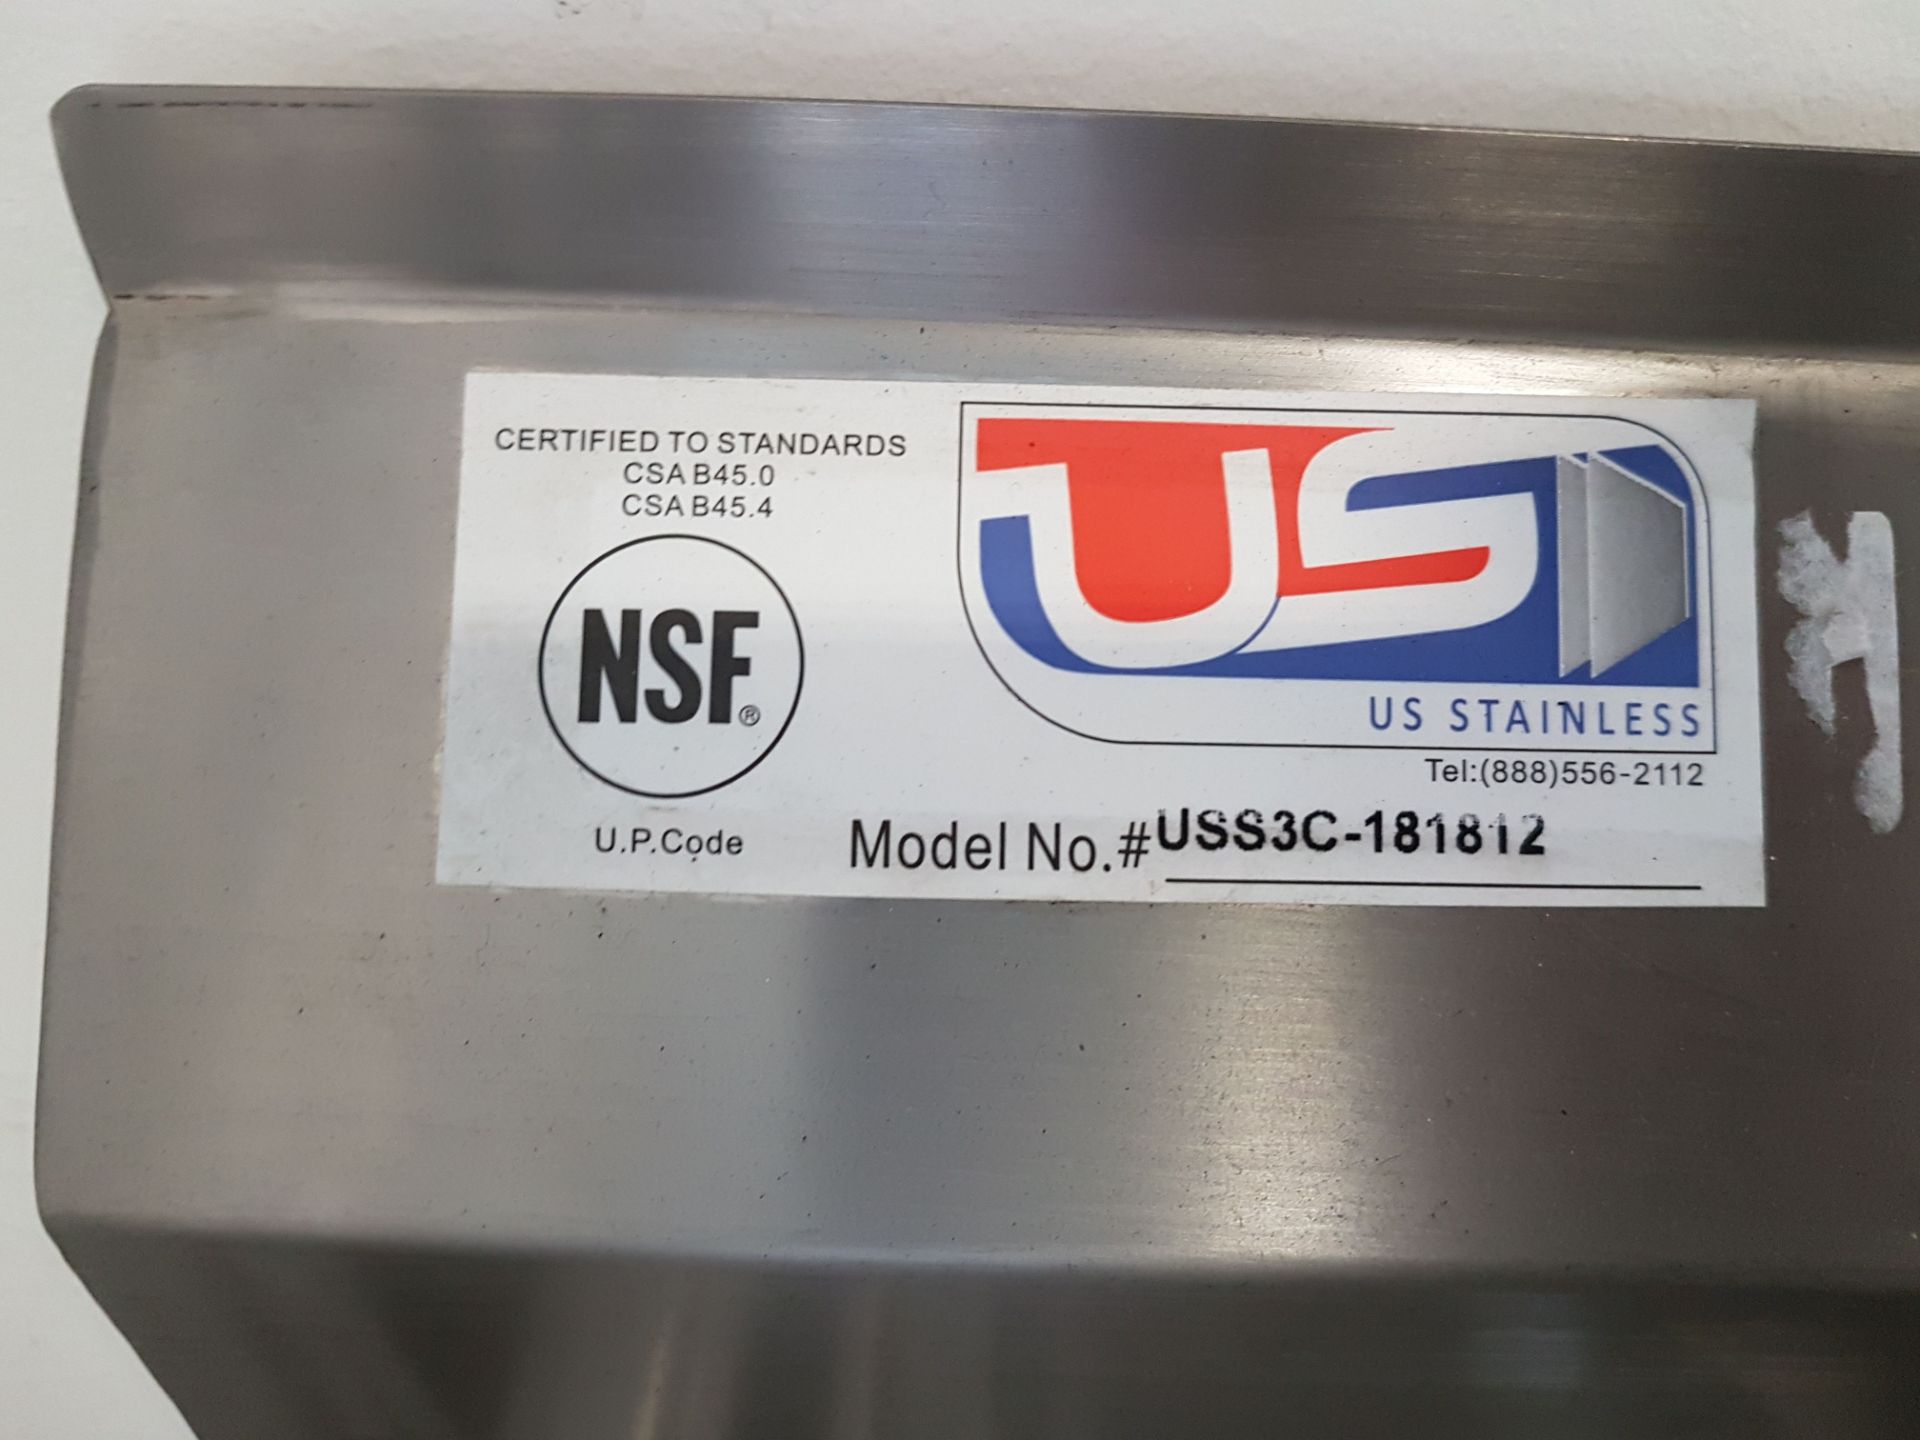 18" x 18" 3 Compartment Sink - USS3C-181812 - Image 2 of 2